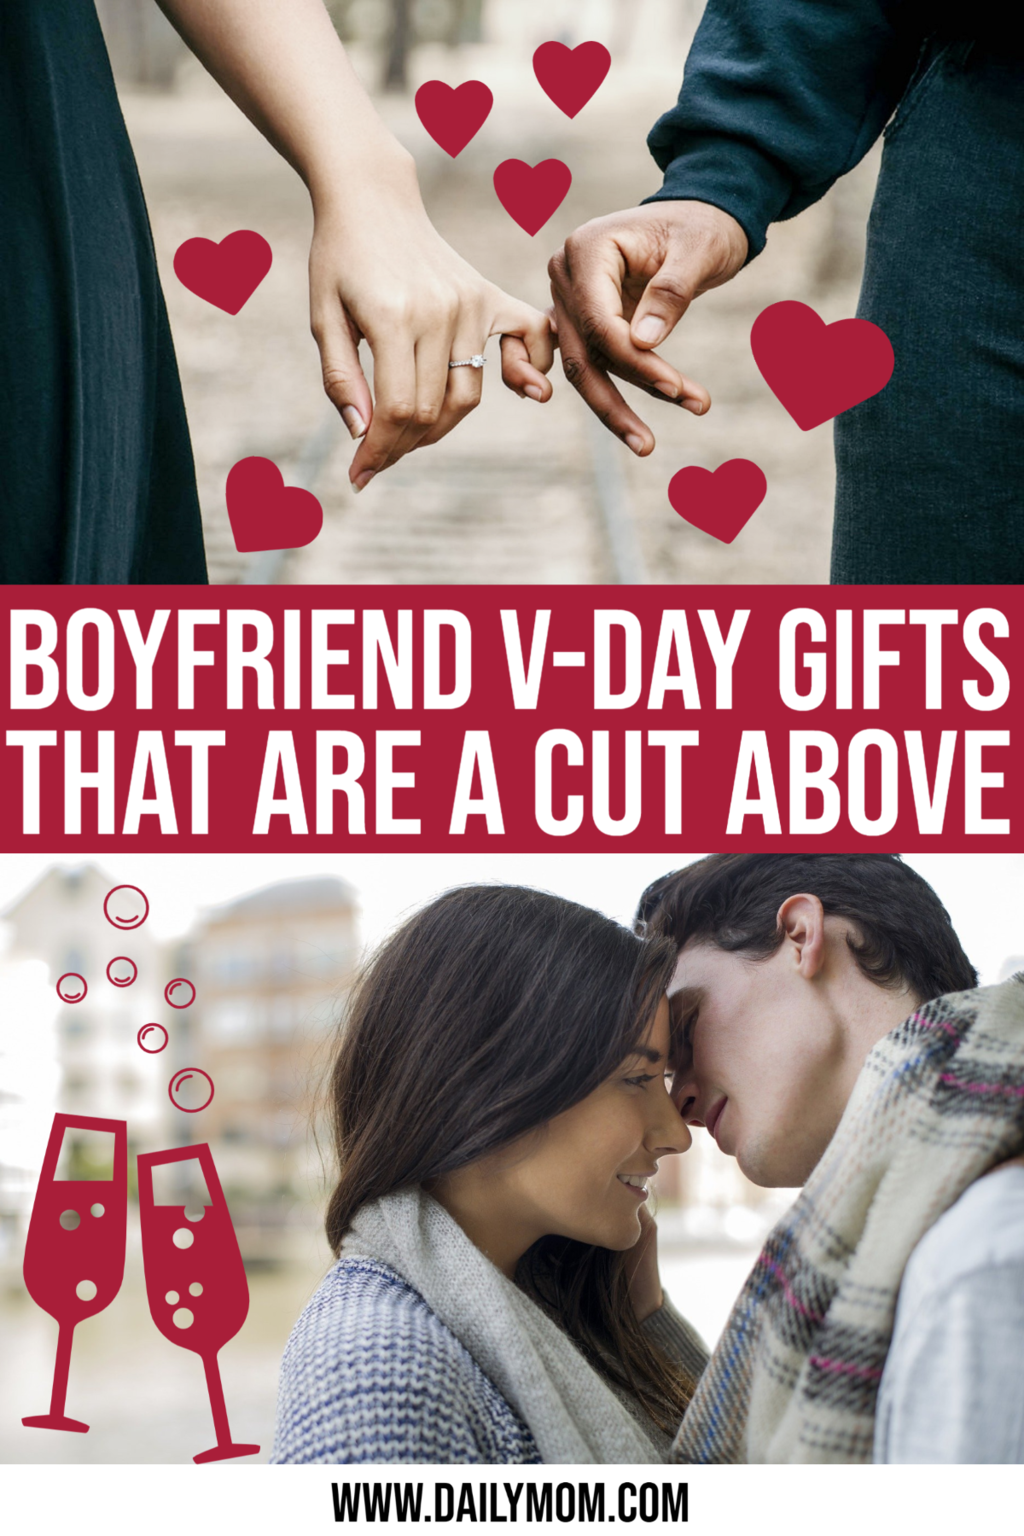 26 Hubby Or Boyfriend Valentine’S Day Gifts That Are A Cut Above